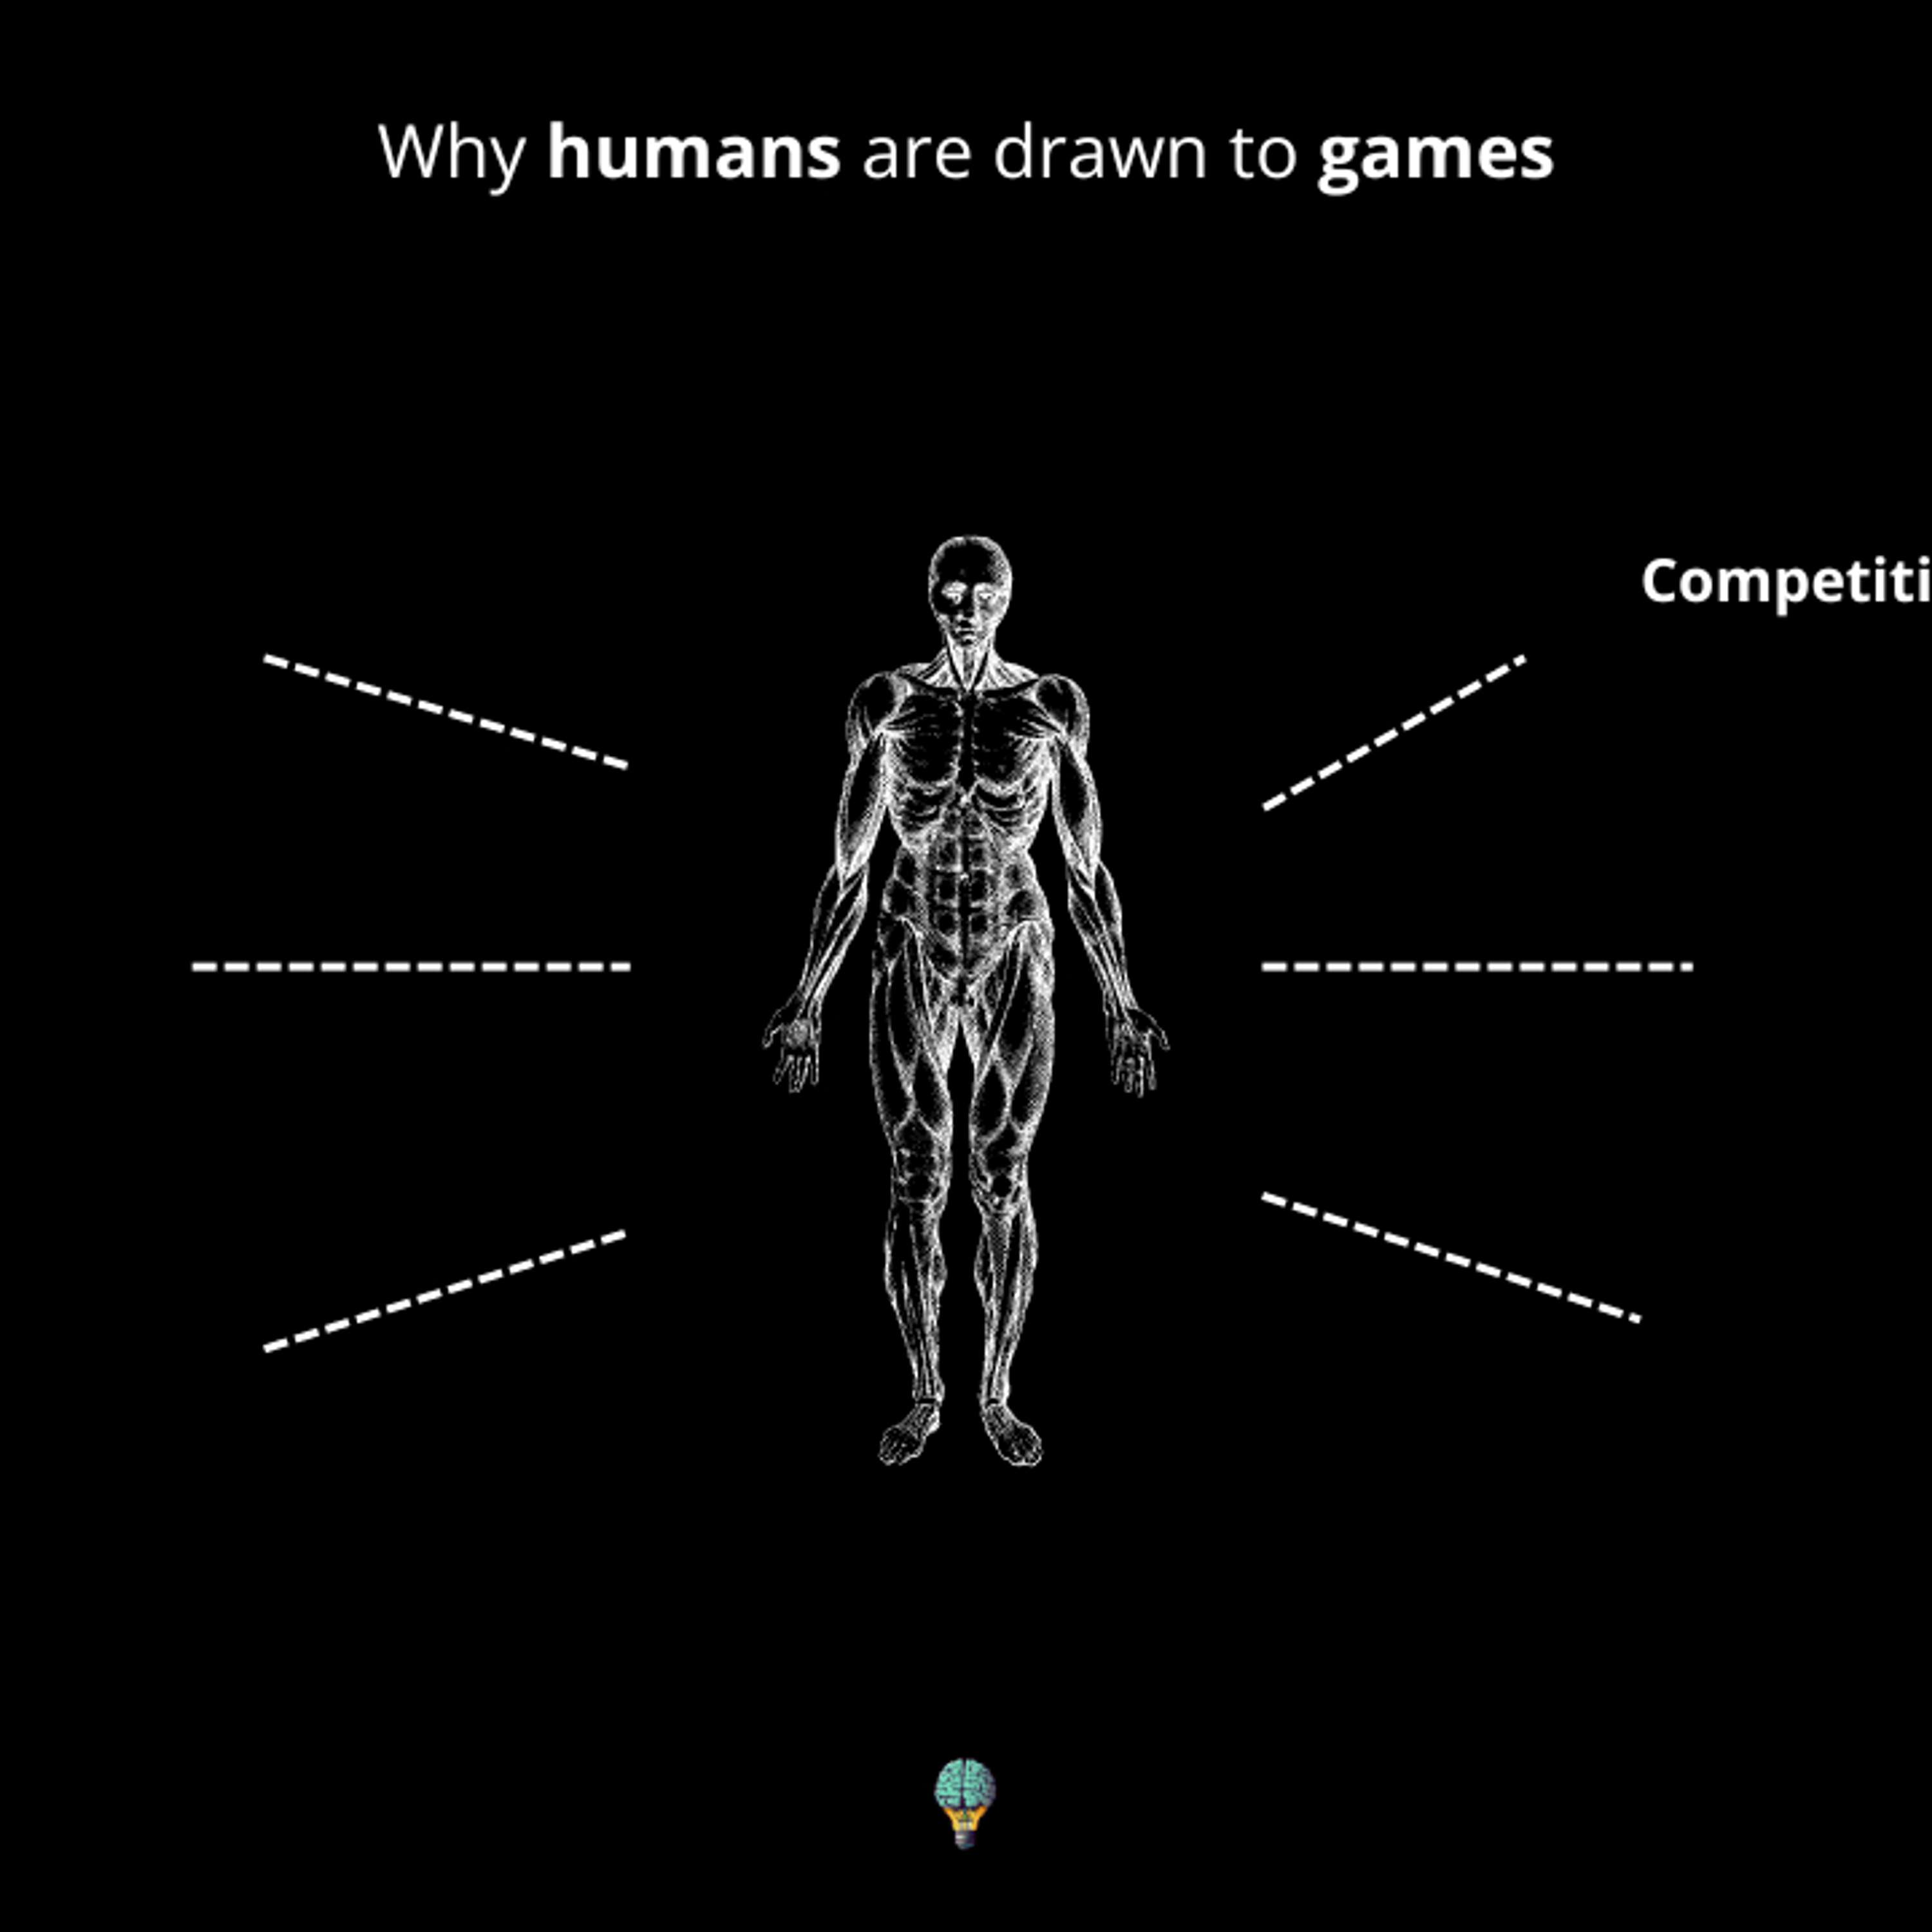 Why Humans Are Drawn to Games